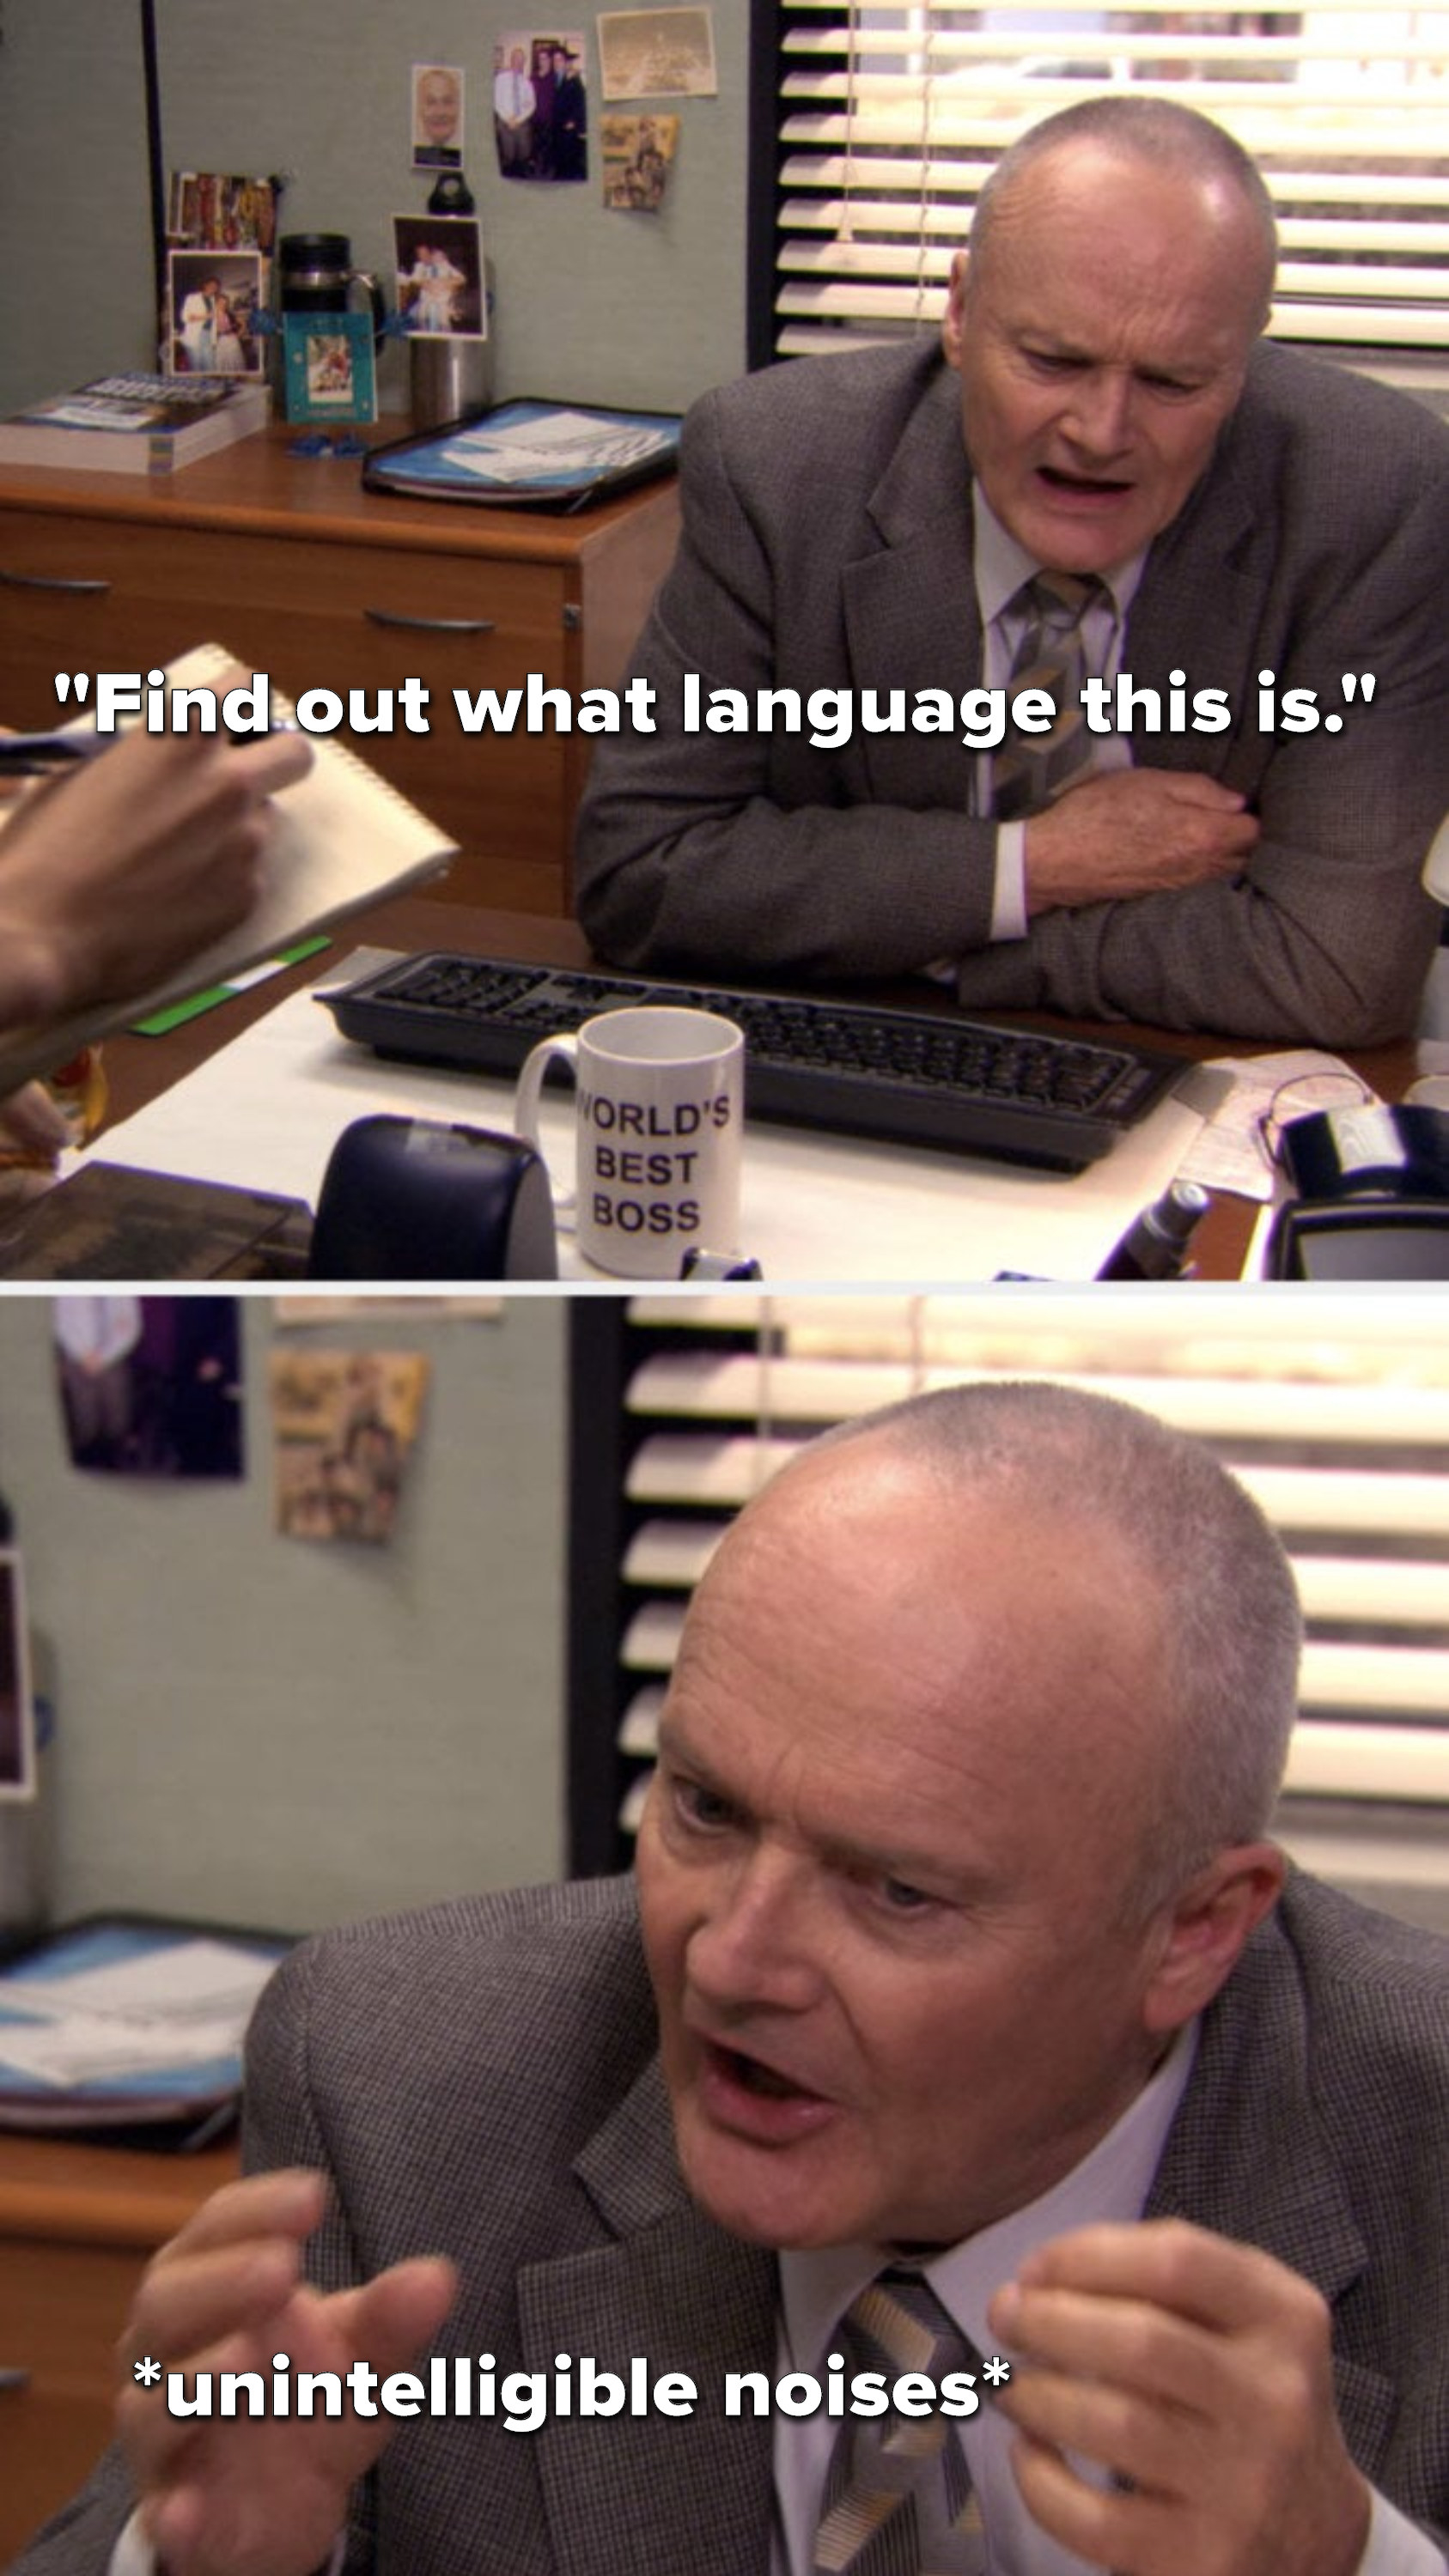 Creed says, Find out what language this is and then makes unintelligible noises